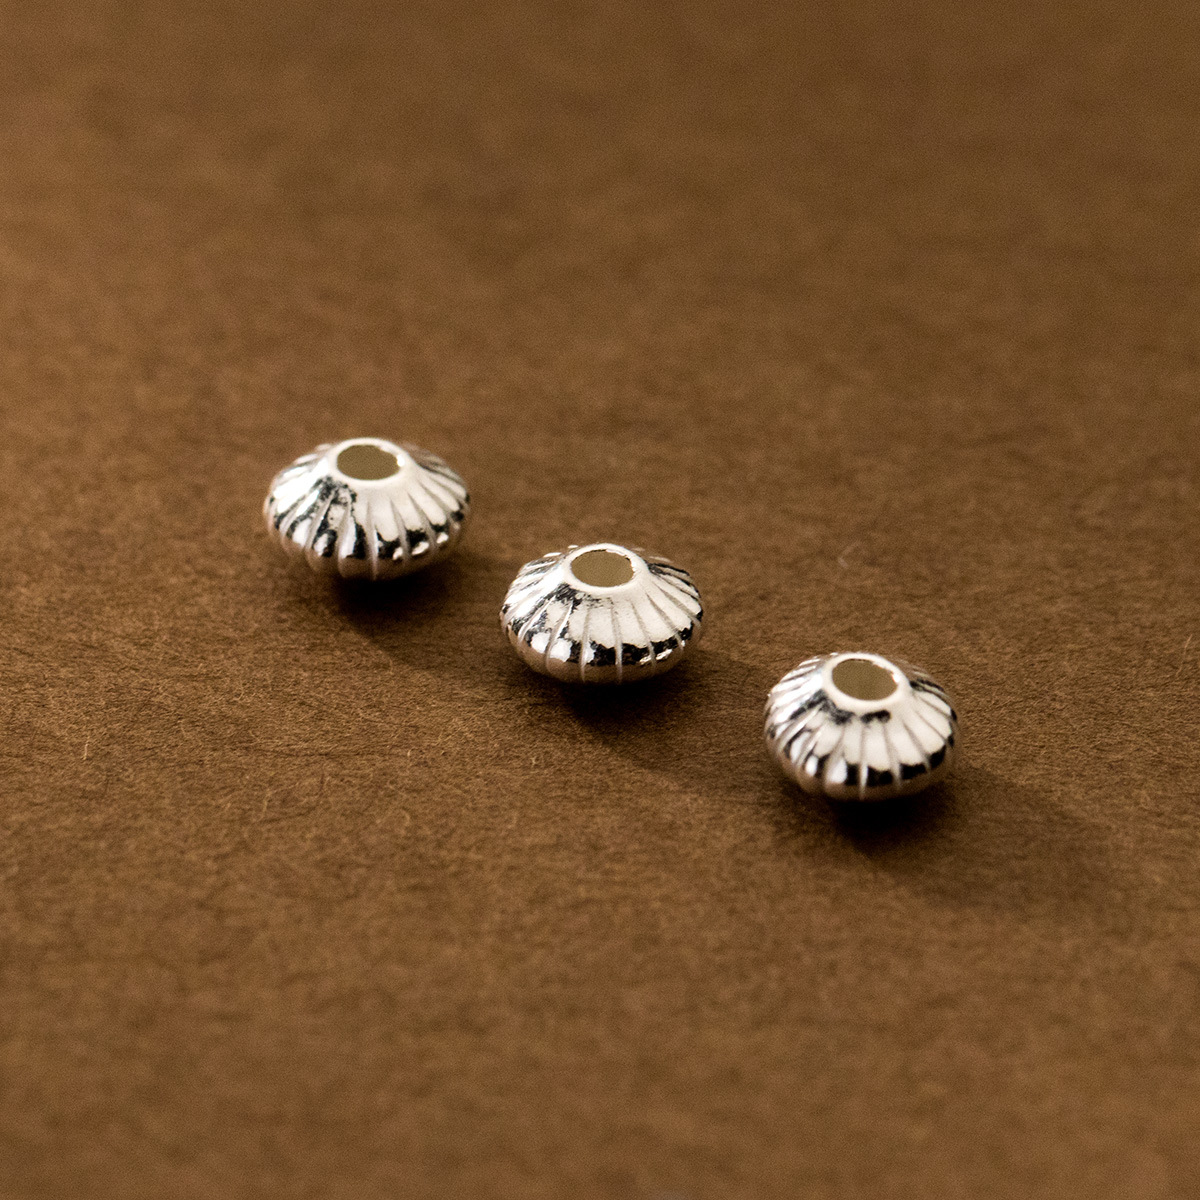 3:6.5 mm in diameter and 2.1 mm in height